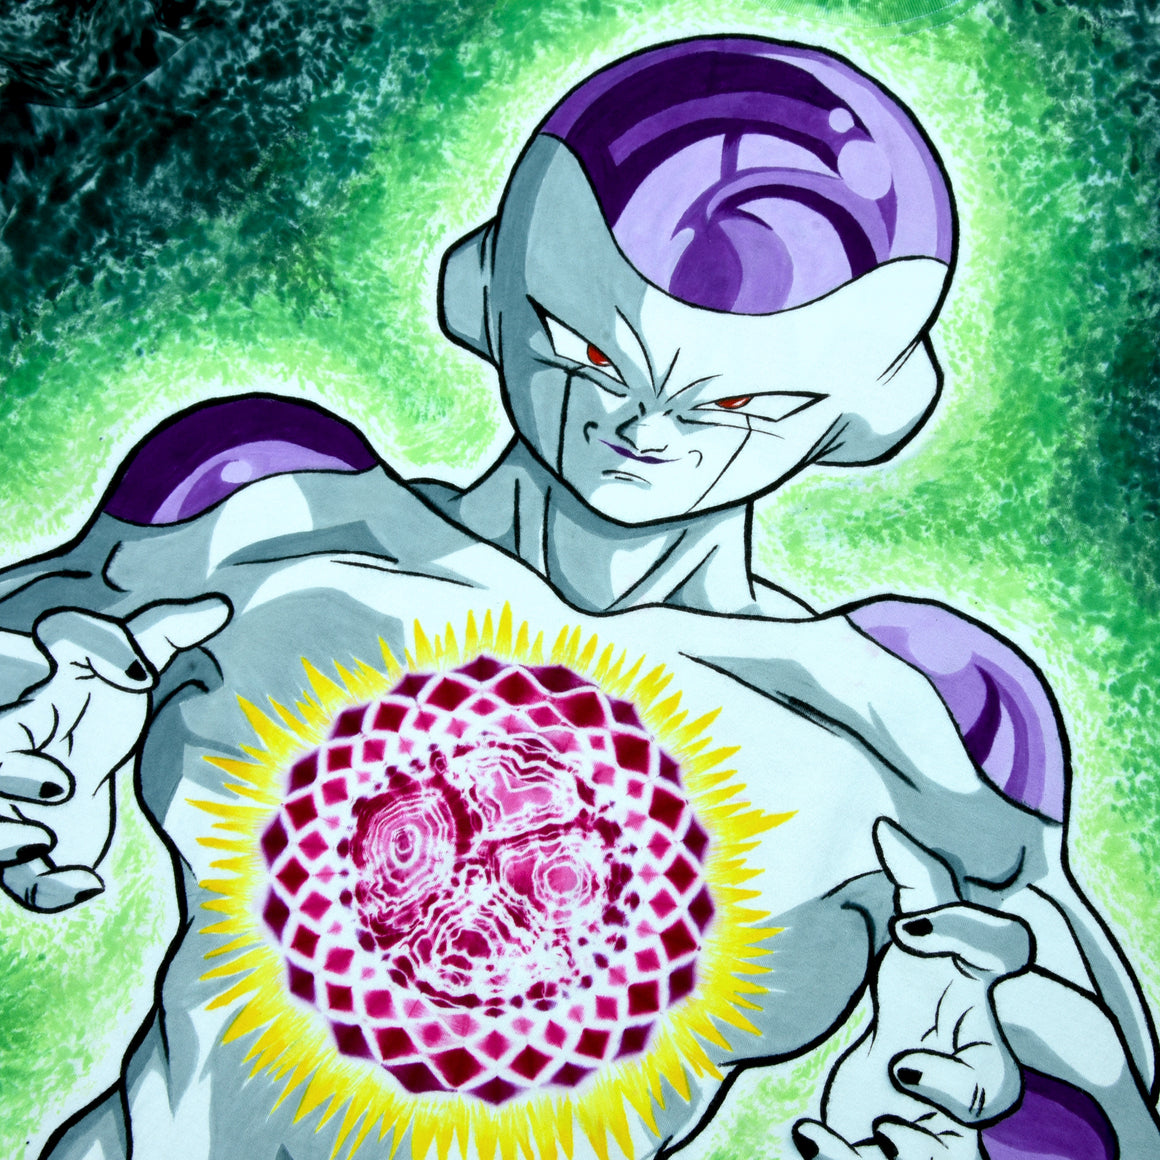 XL - Tie-dyed and Hand-painted T-Shirt - DBZ Frieza #1